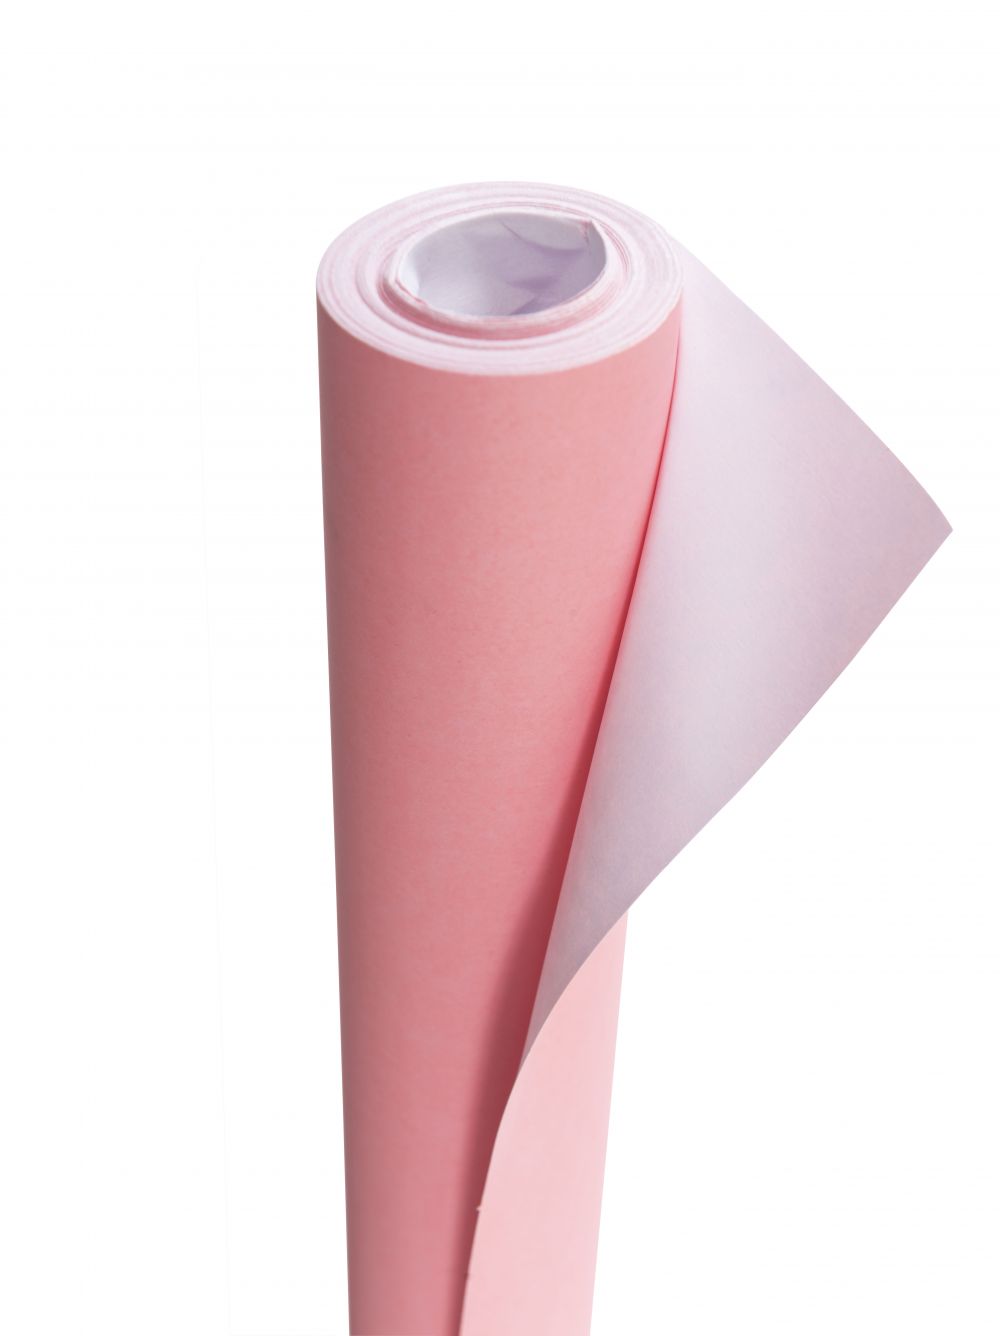 Poster Paper Sheets - Clyde Paper and Print